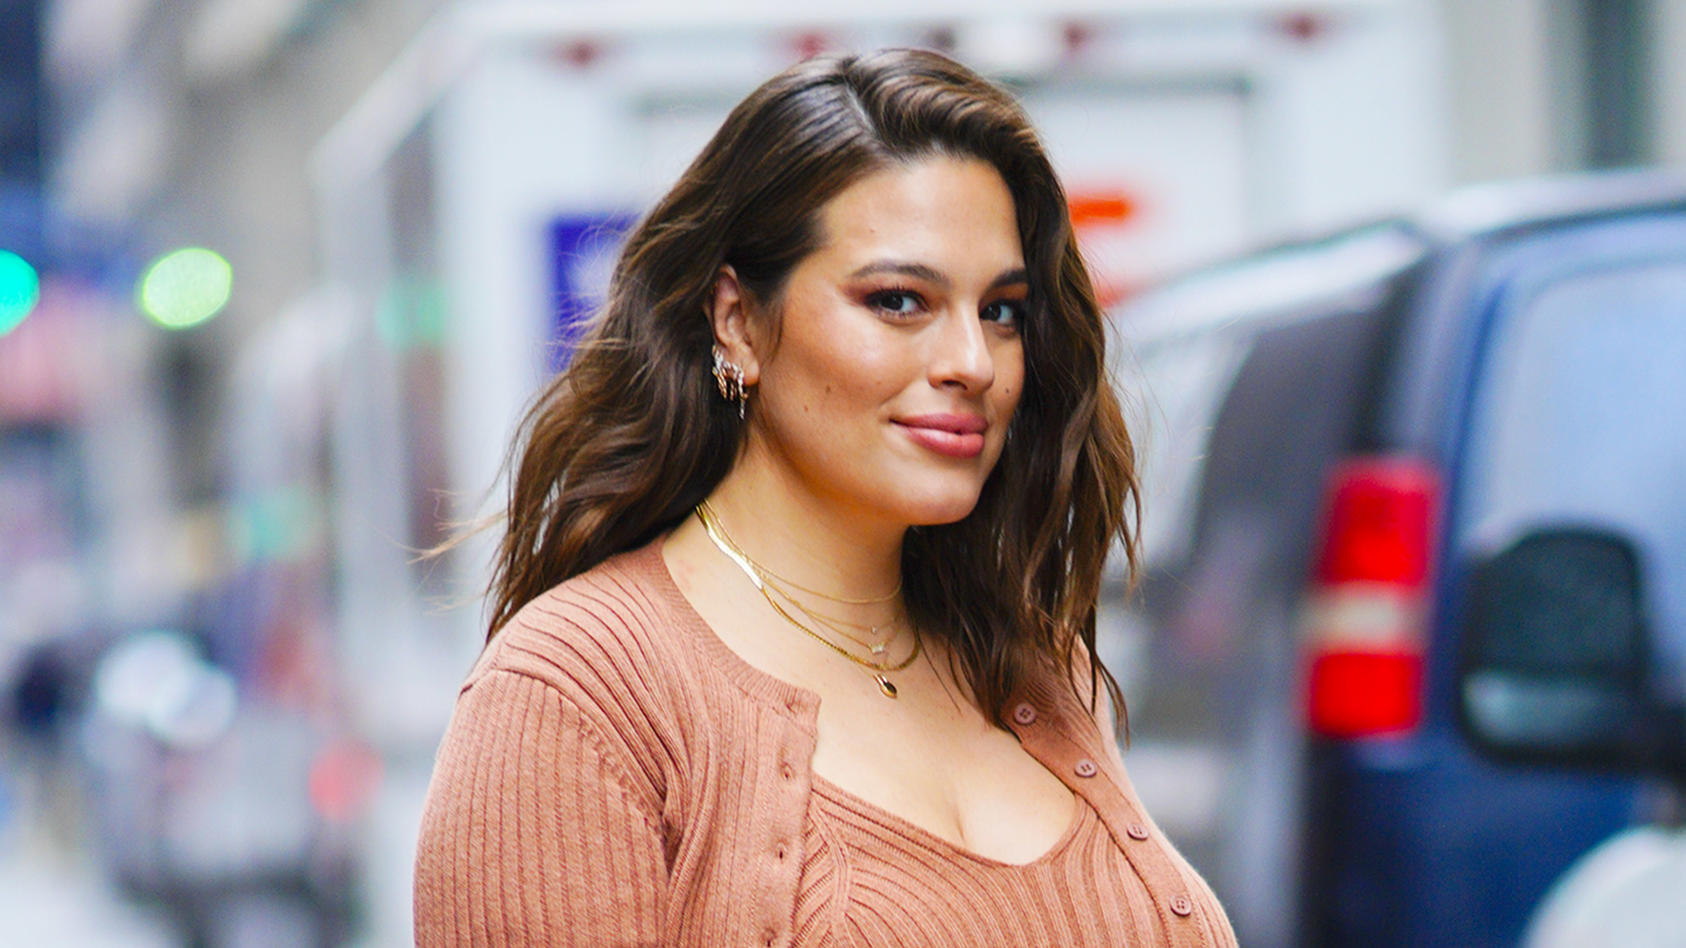 Ashley Graham out and about in a shapely dress in New YorkPictured: Ashley GrahamRef: SPL5130026 181119 NON-EXCLUSIVEPicture by: Jackson Lee / SplashNews.comSplash News and PicturesLos Angeles: 310-821-2666New York: 212-619-2666London: +44 (0)20 7644